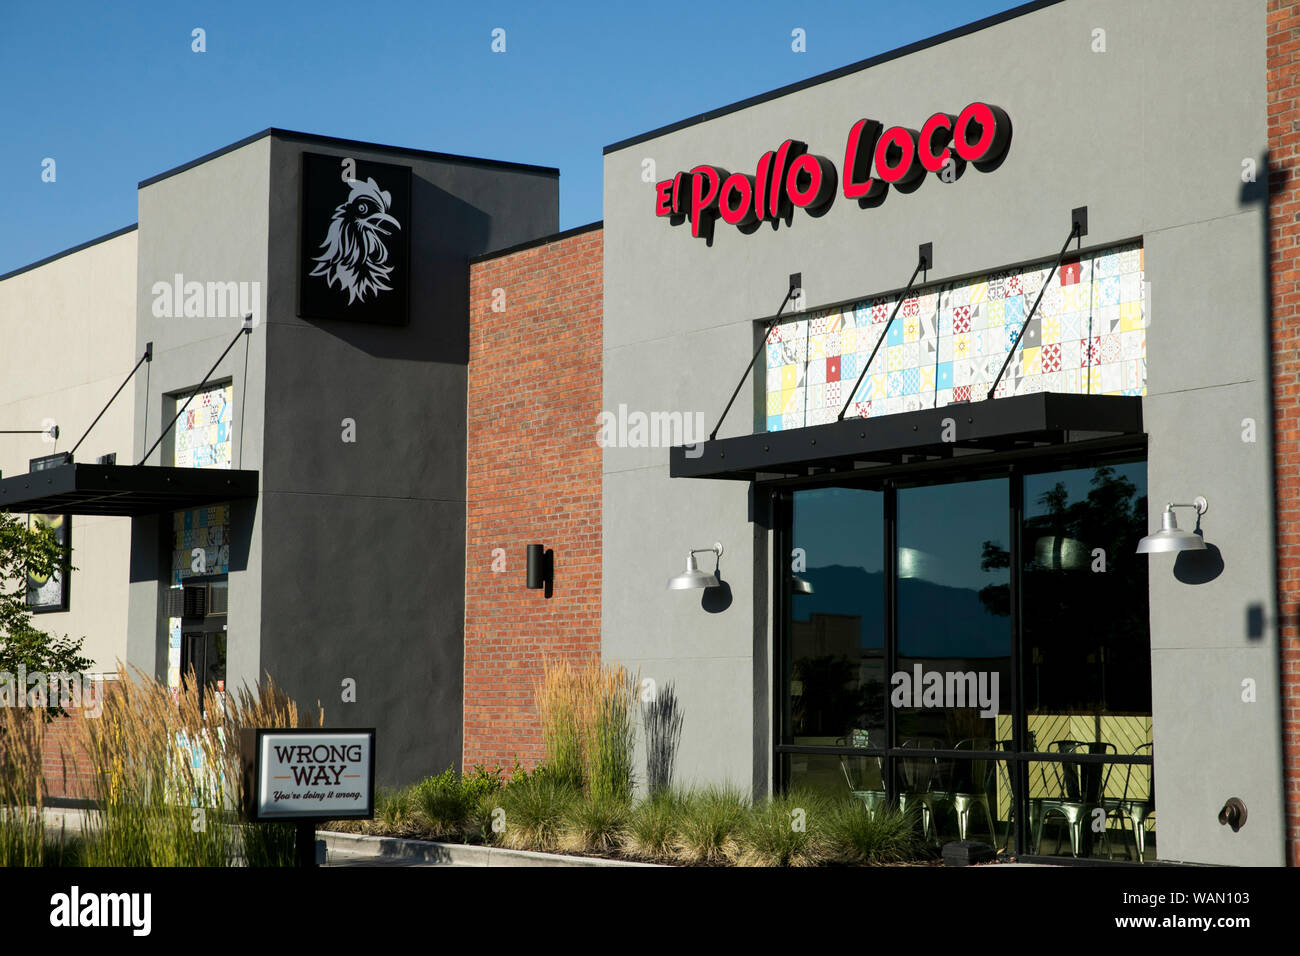 A logo sign outside of a El Pollo Loco fast food restaurant location in Orem, Utah on July 29, 2019. Stock Photo